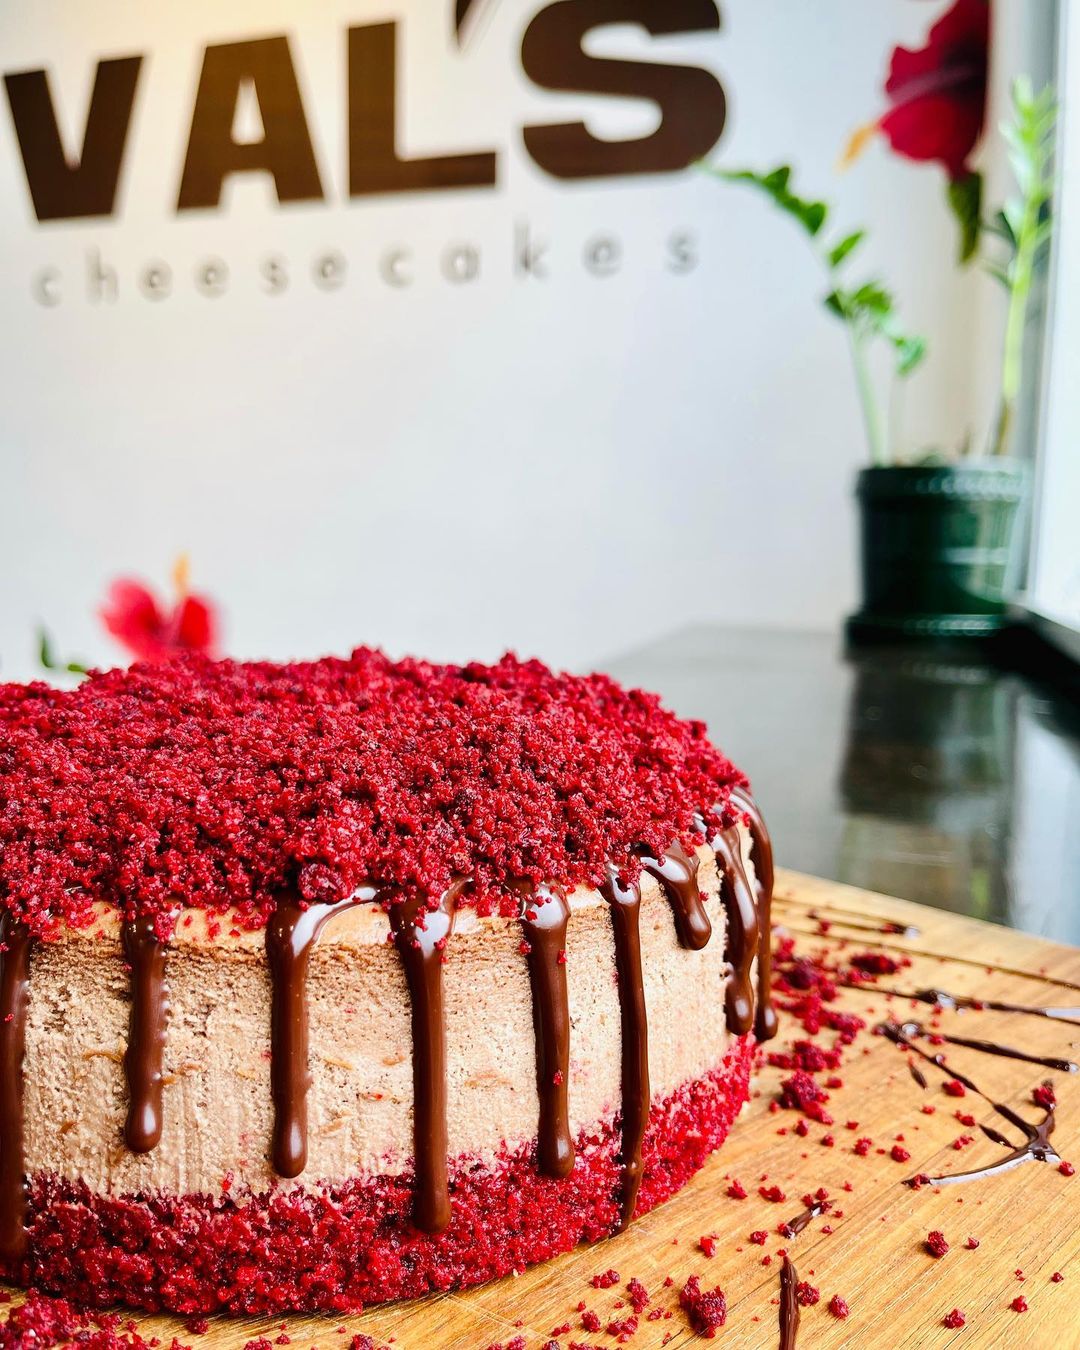 Photo of red velvet cheesecake in front of bakery sign that says Val's